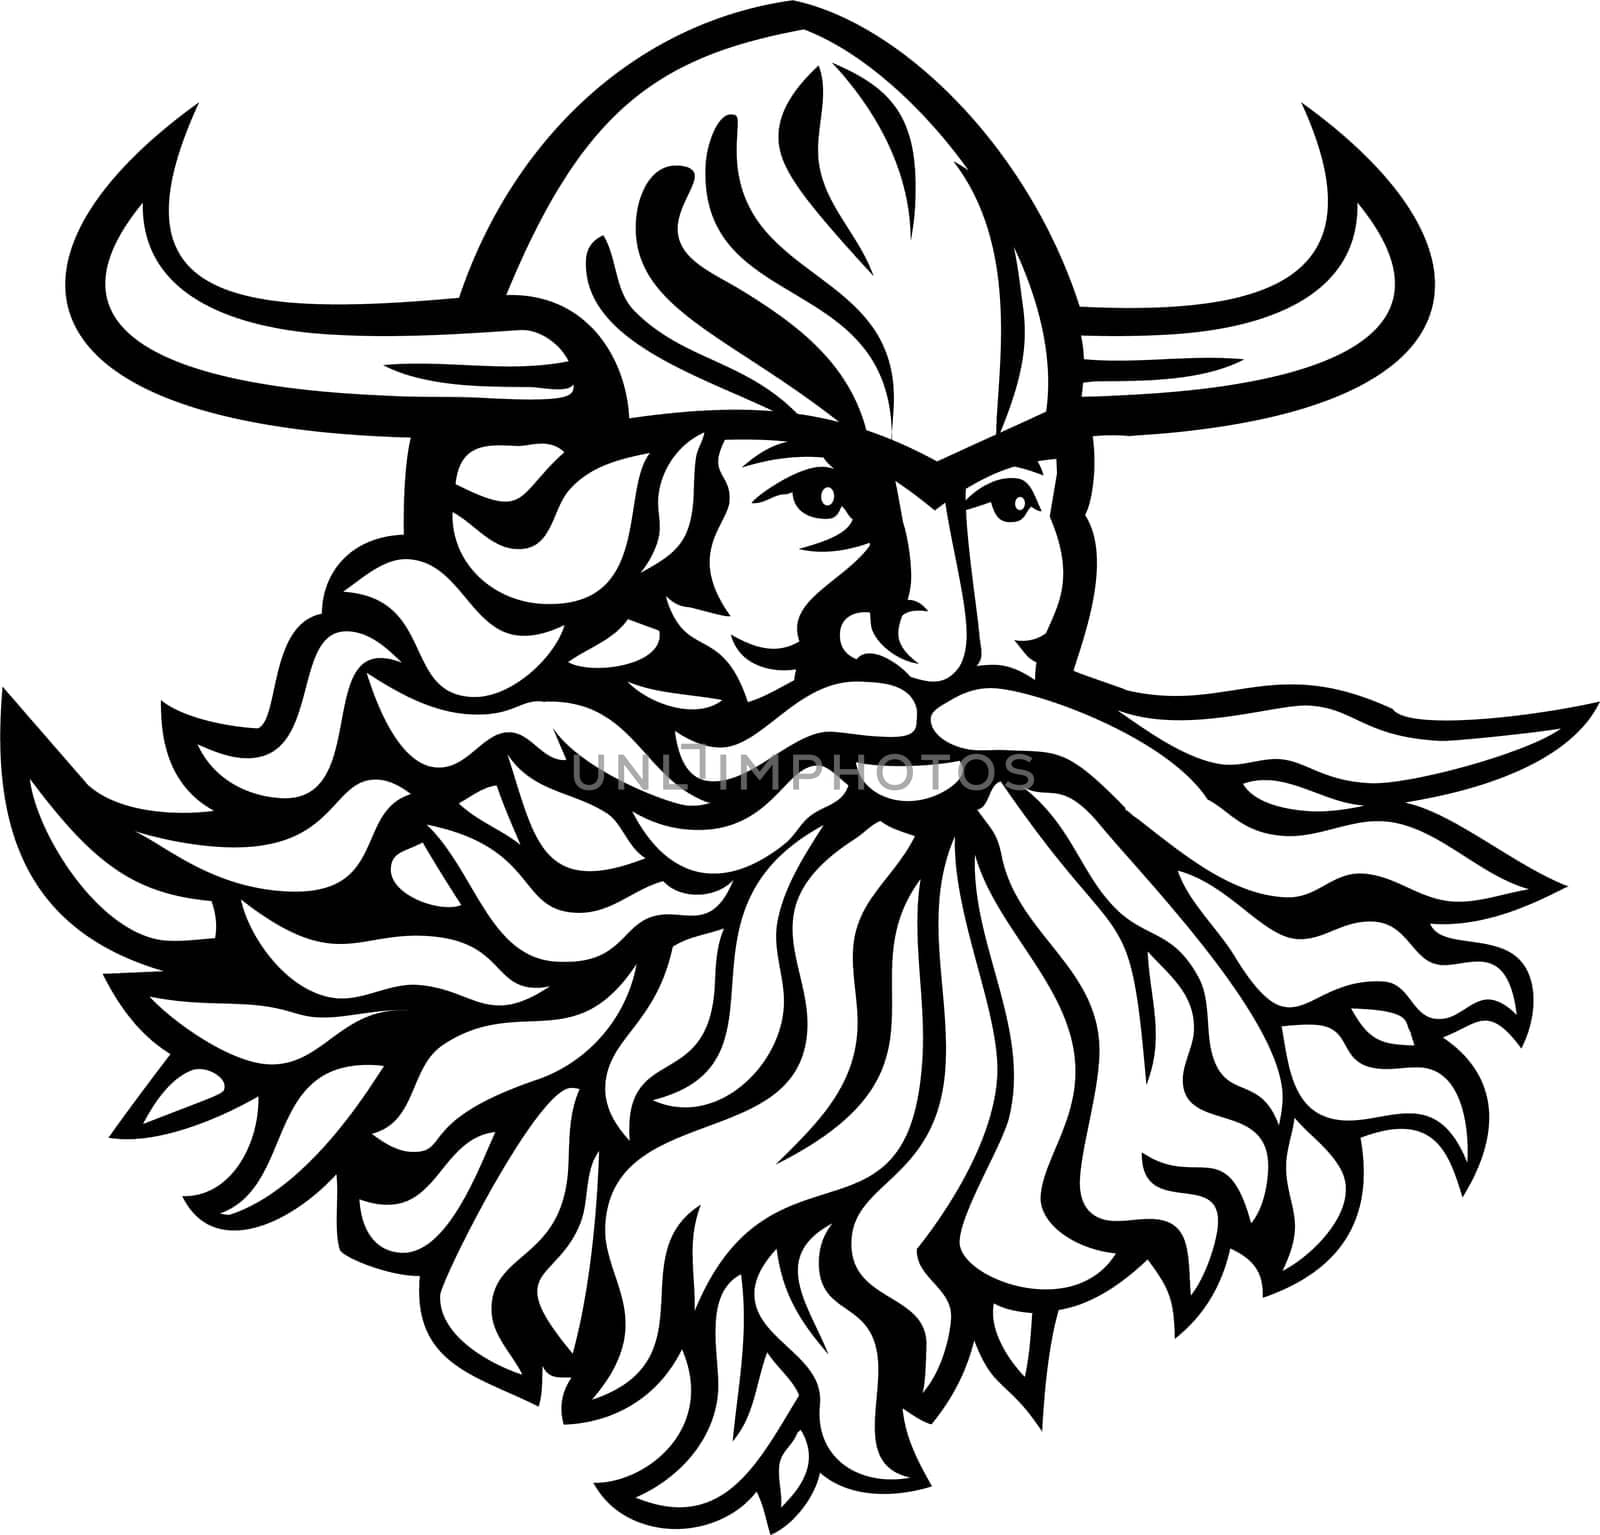 Mascot illustration of head of Aegir, Hler or Gymir Viking God of the sea in Norse mythology with flowing beard viewed from front on isolated background in retro style.